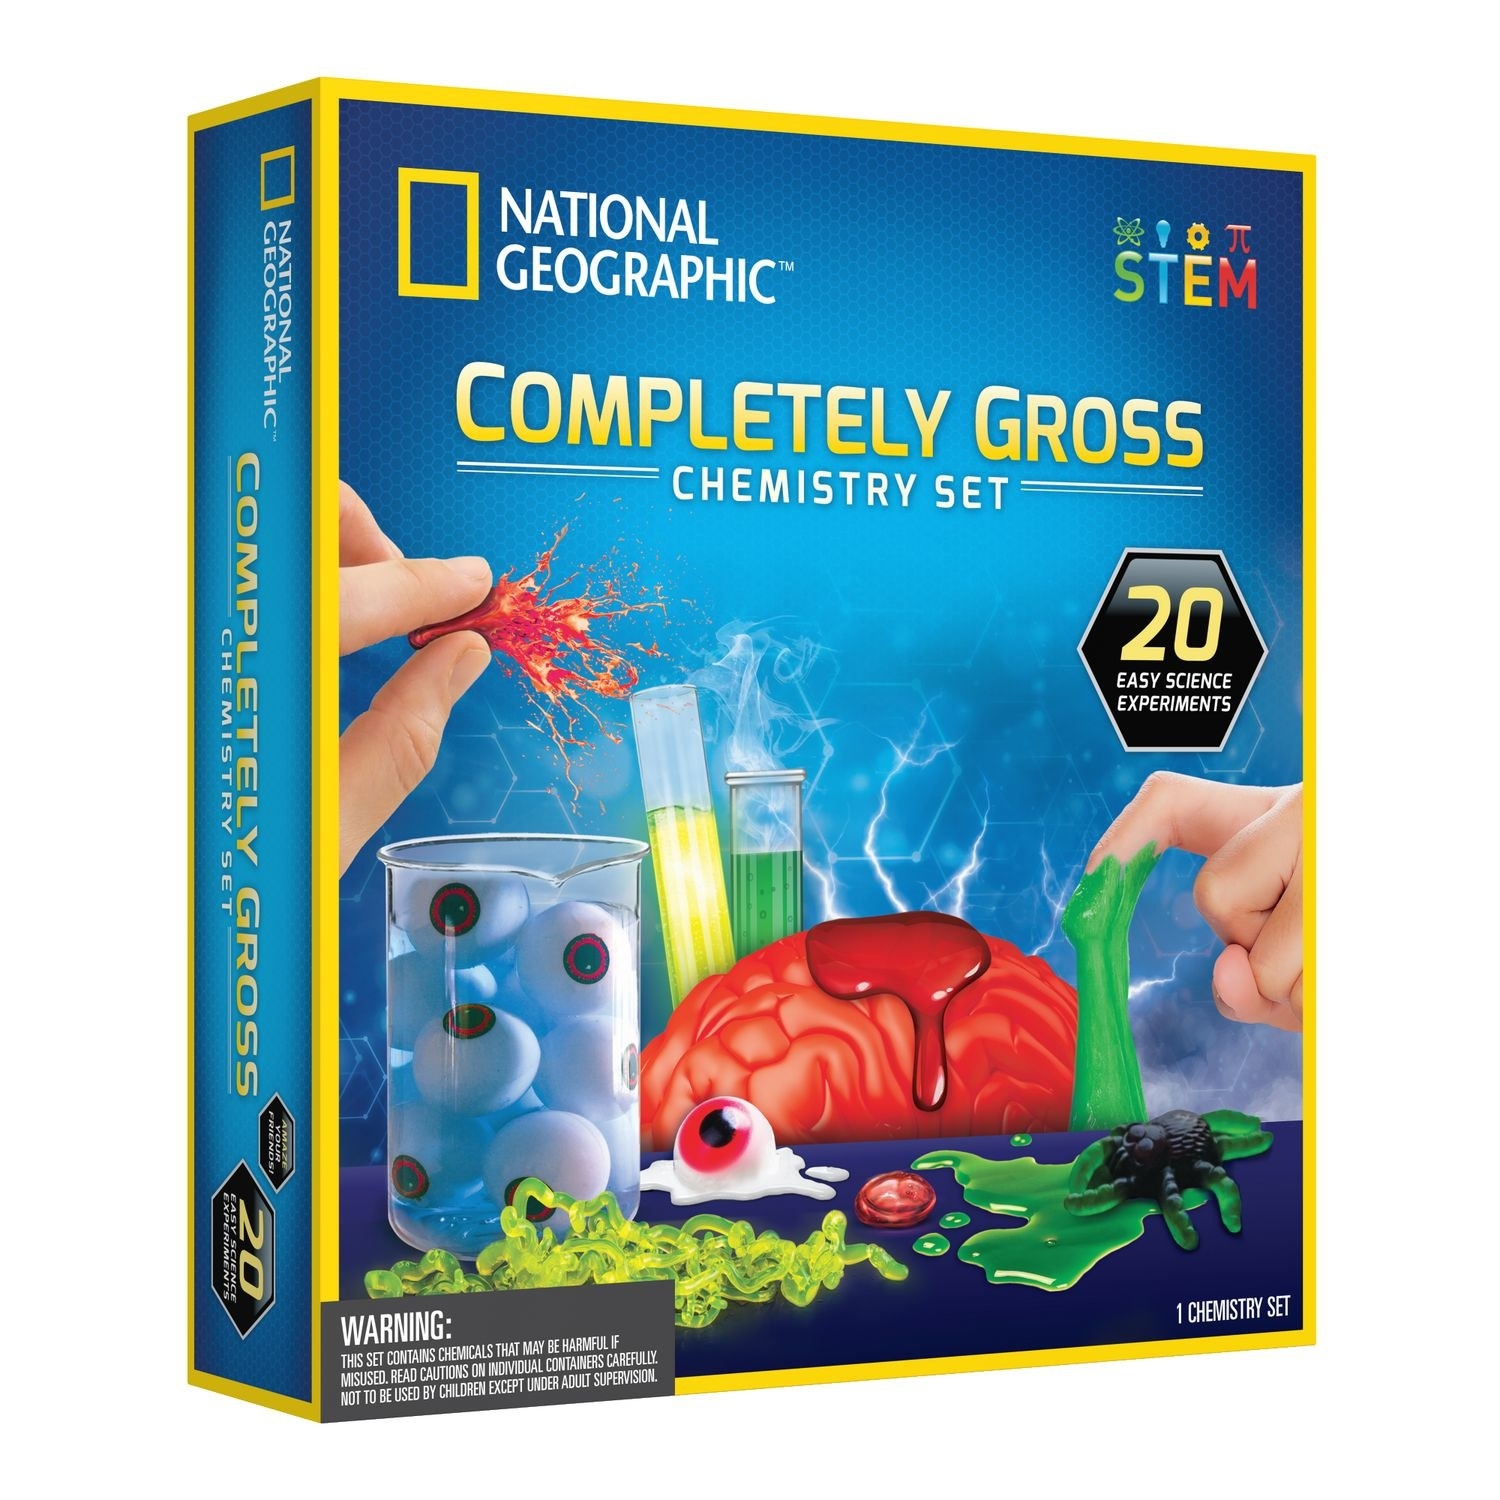 the cover of the box of the set with eyeballs in beakers and a brain